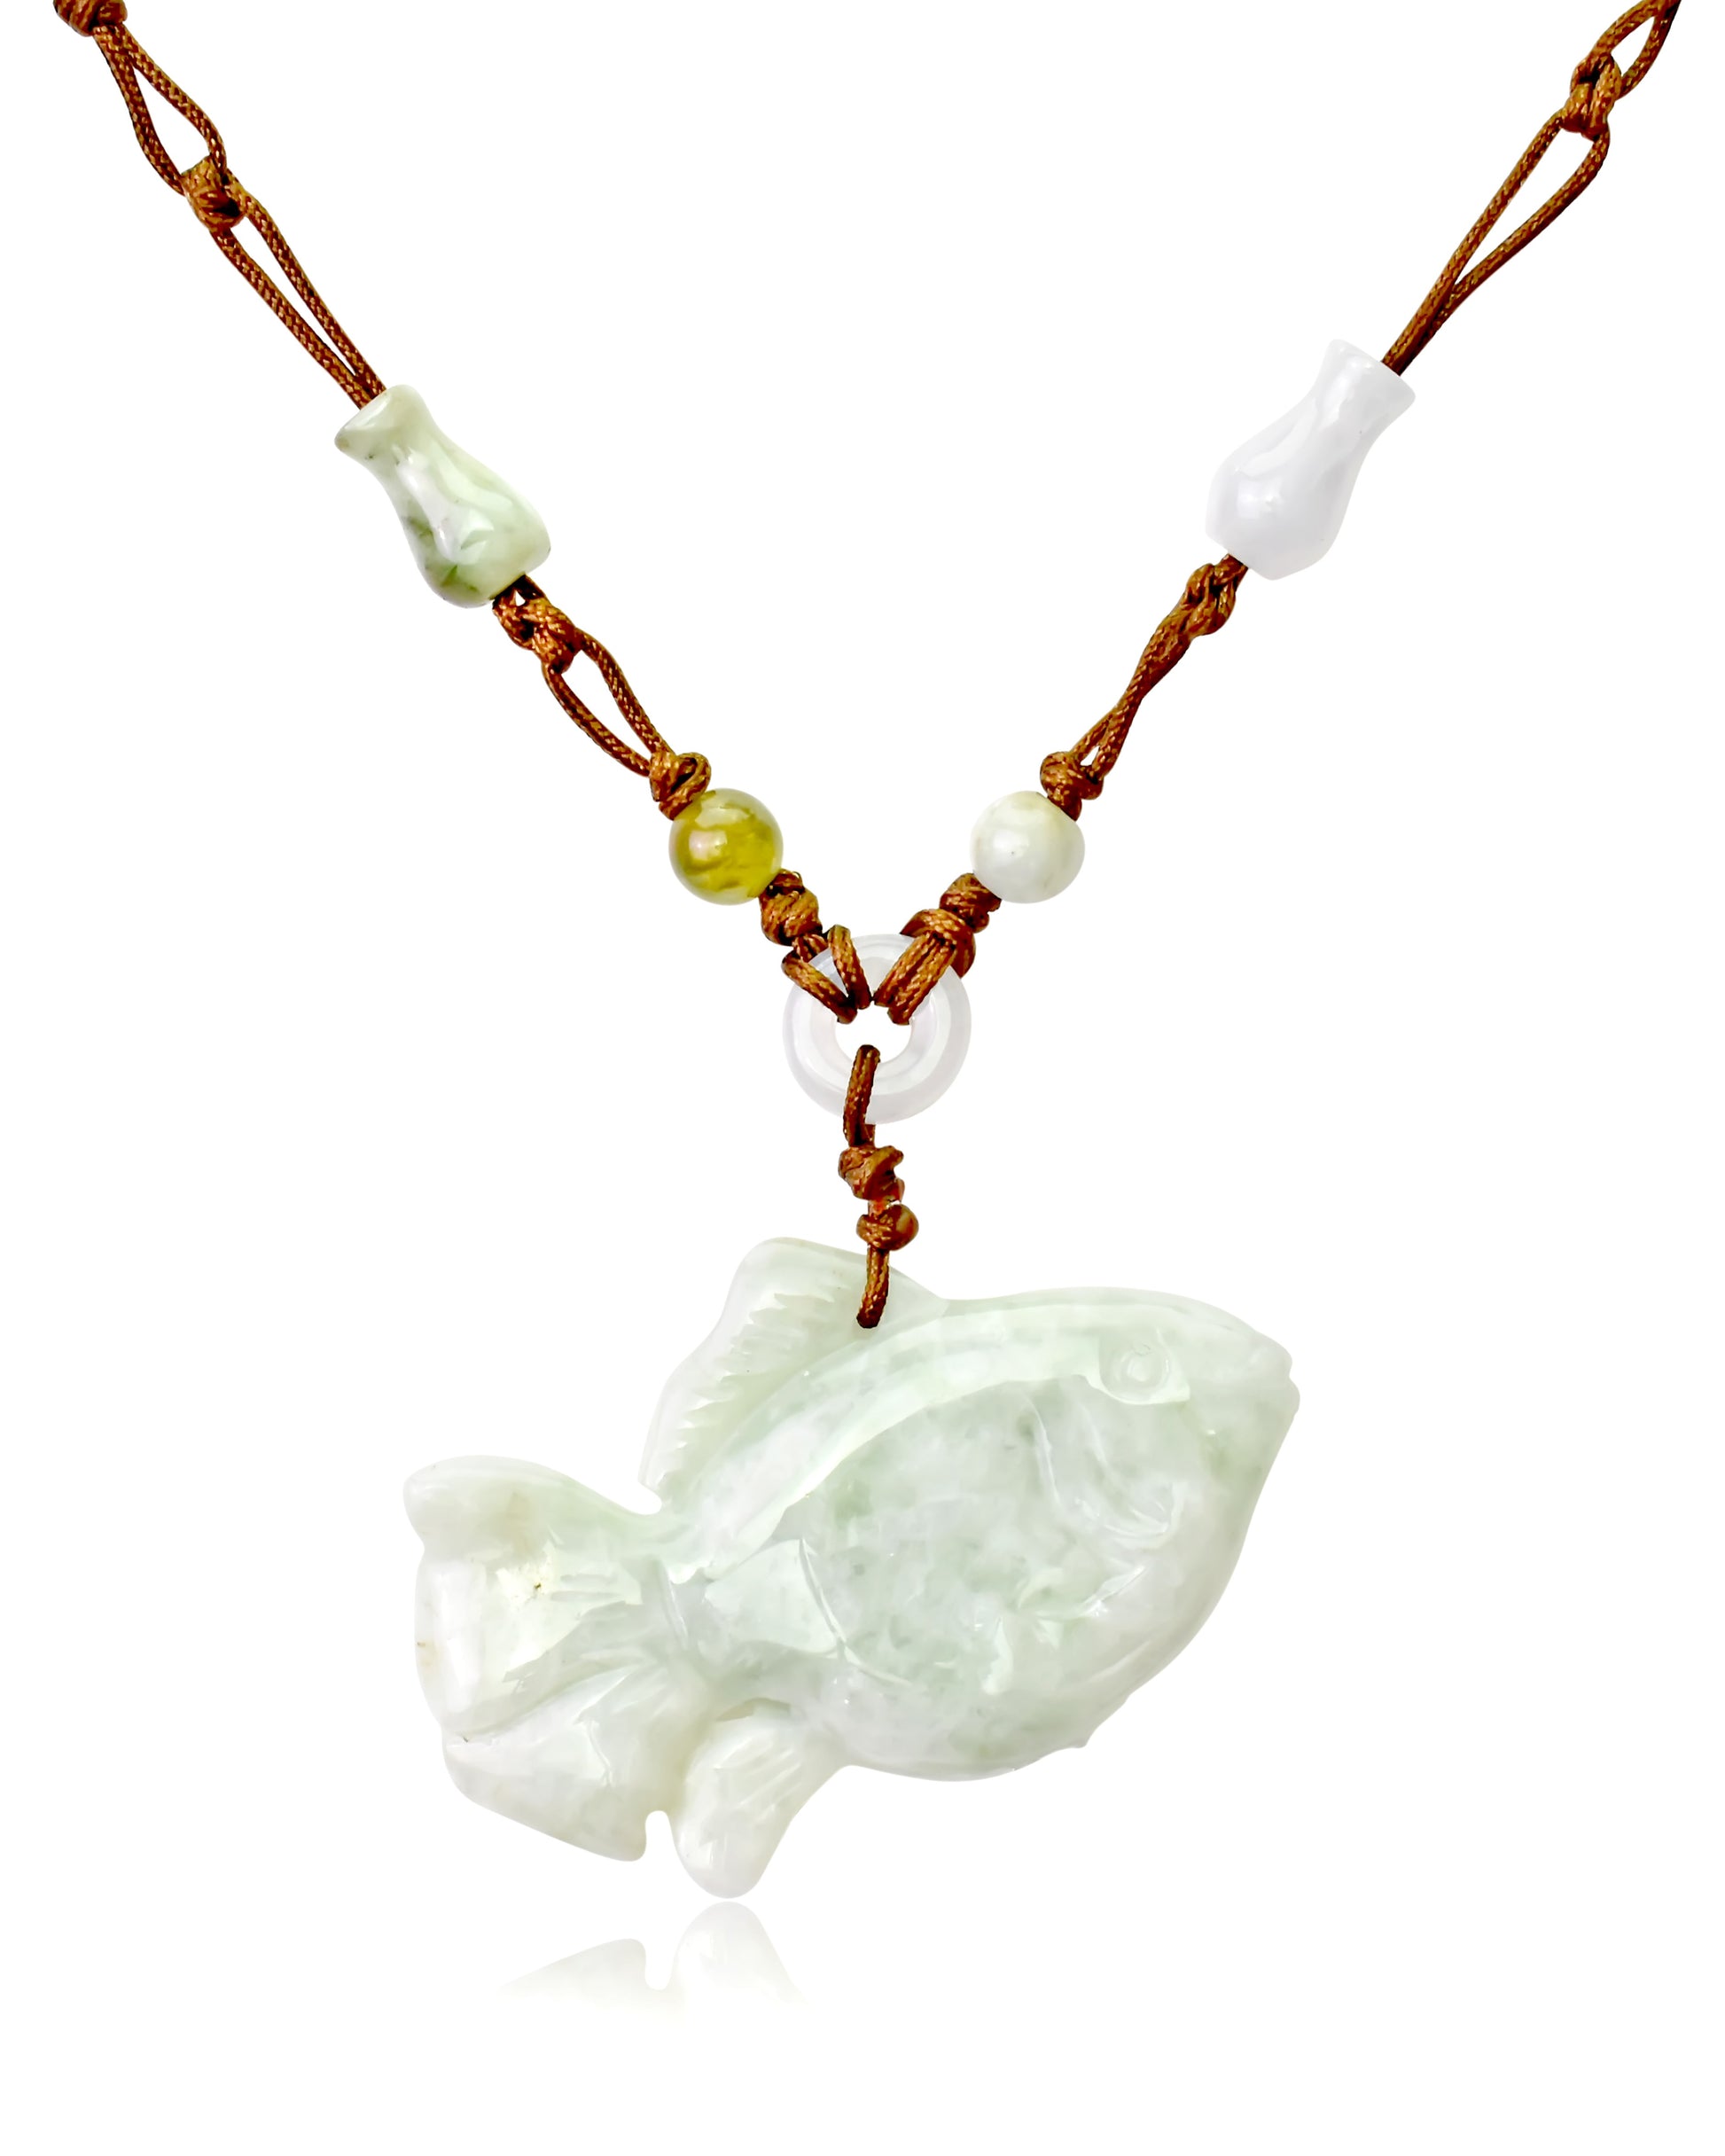 Shine Brightly with Beautiful Topical Fish Jade Necklace